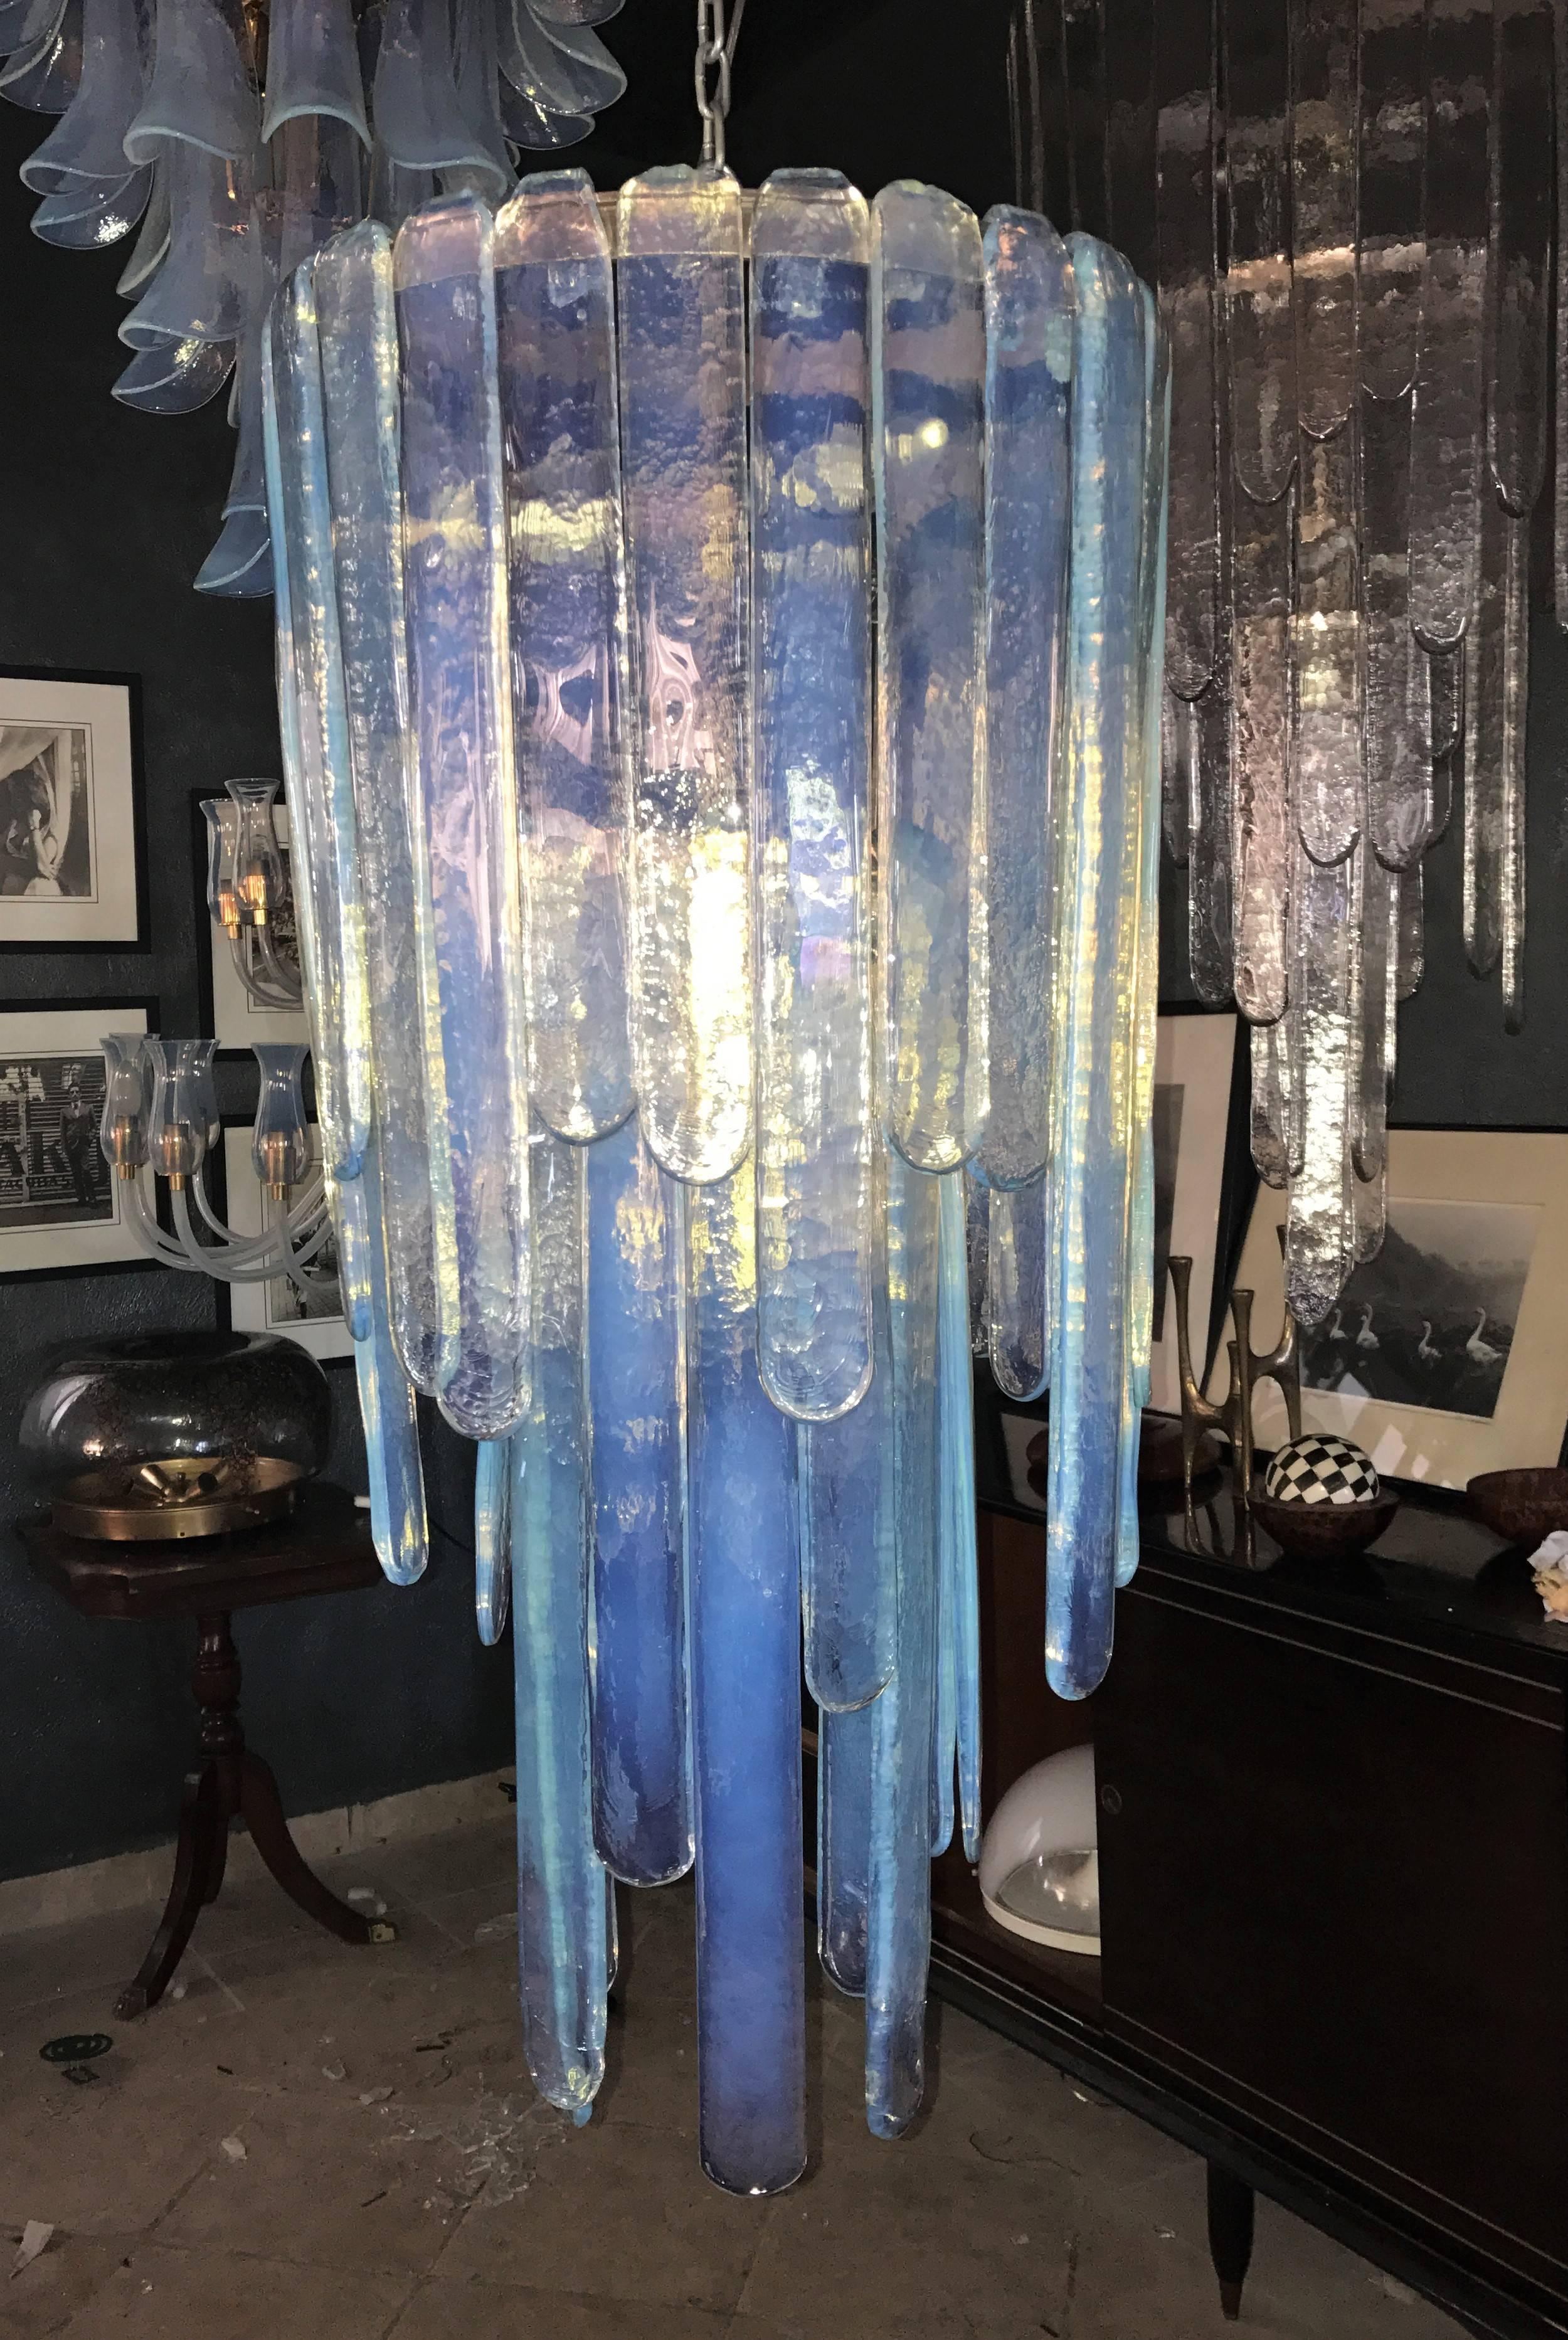 Mid-Century Modern chandelier by Carlo Nason for Mazzega in a blue opalescent hue, consisting of two stages of glass blades. This chandelier is complete as there is not one inch of space free where the blades hang from. It measures 85cm tall in its